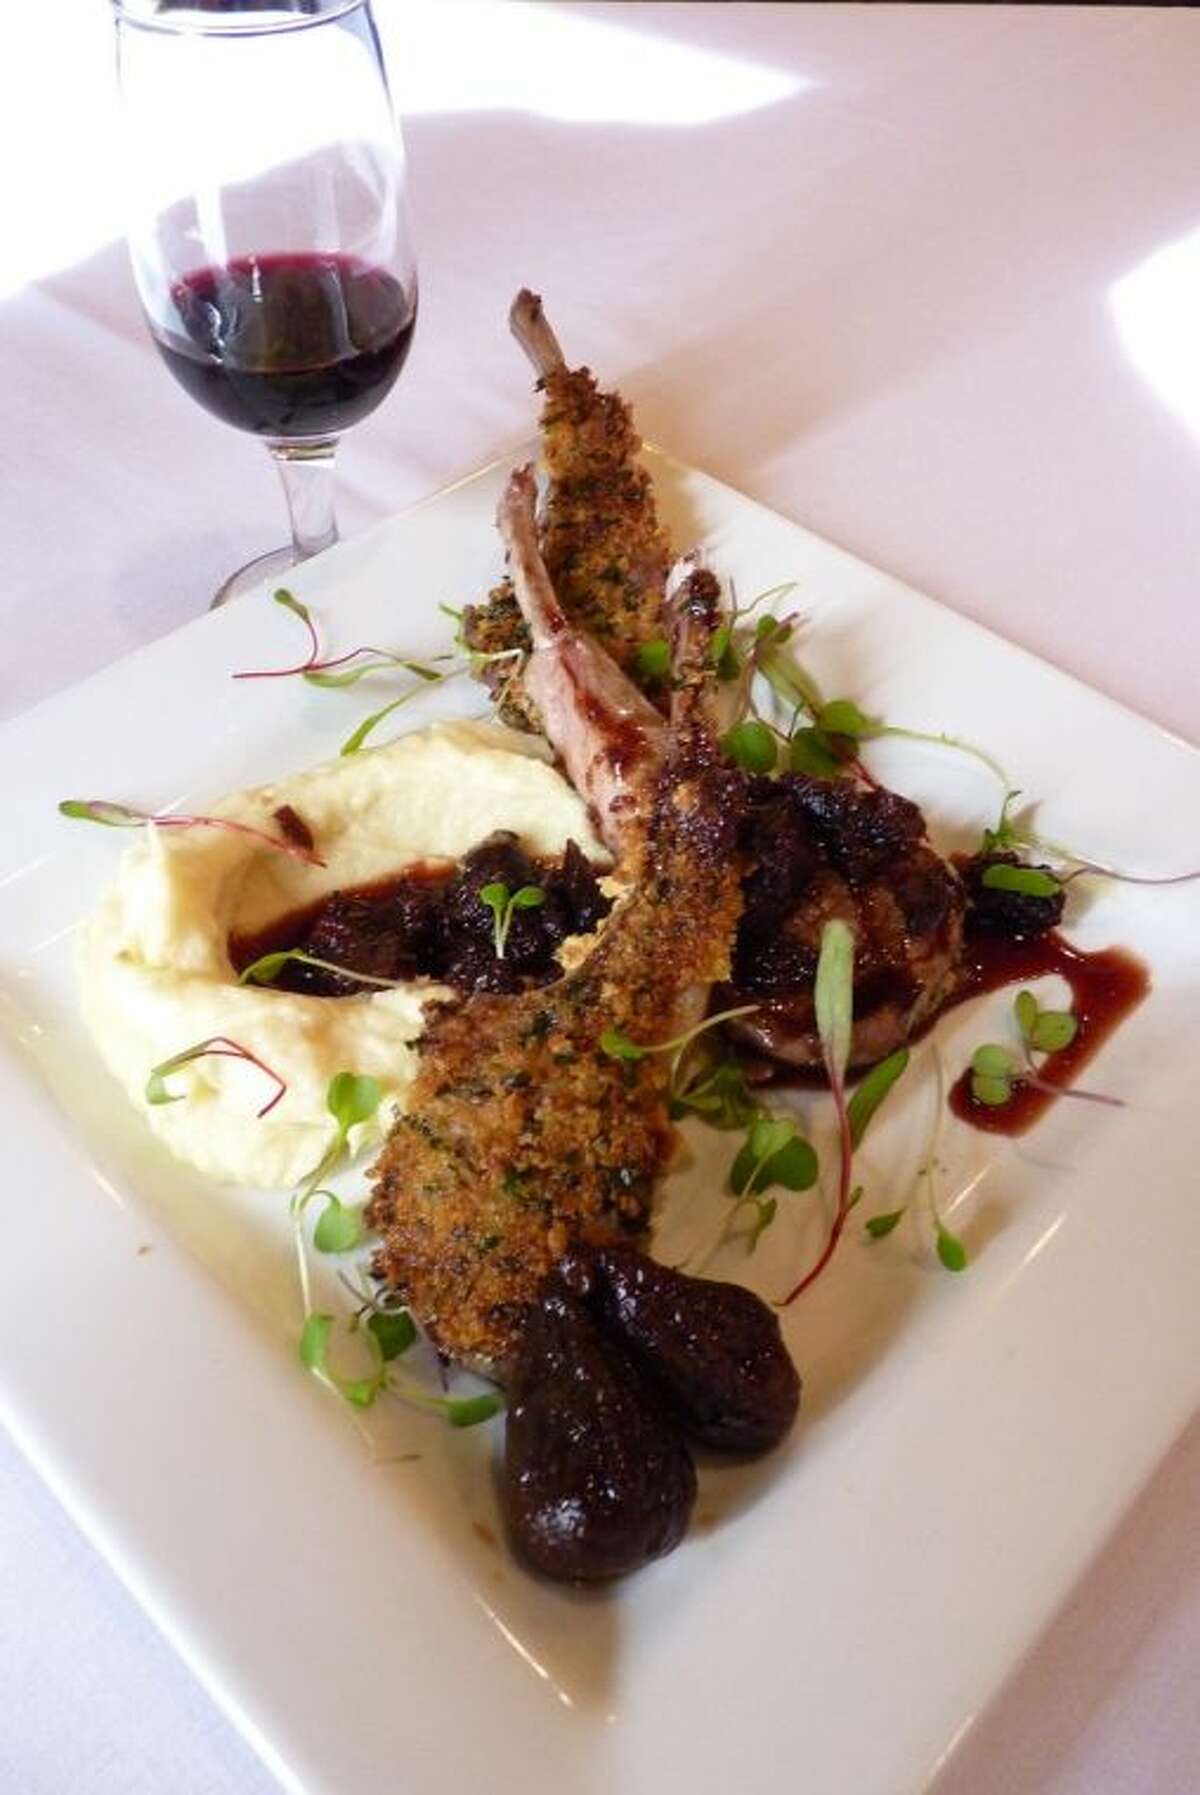 Herb Crusted Rack Of Lamb over celery root puree and topped with a fig cabernet sauce.